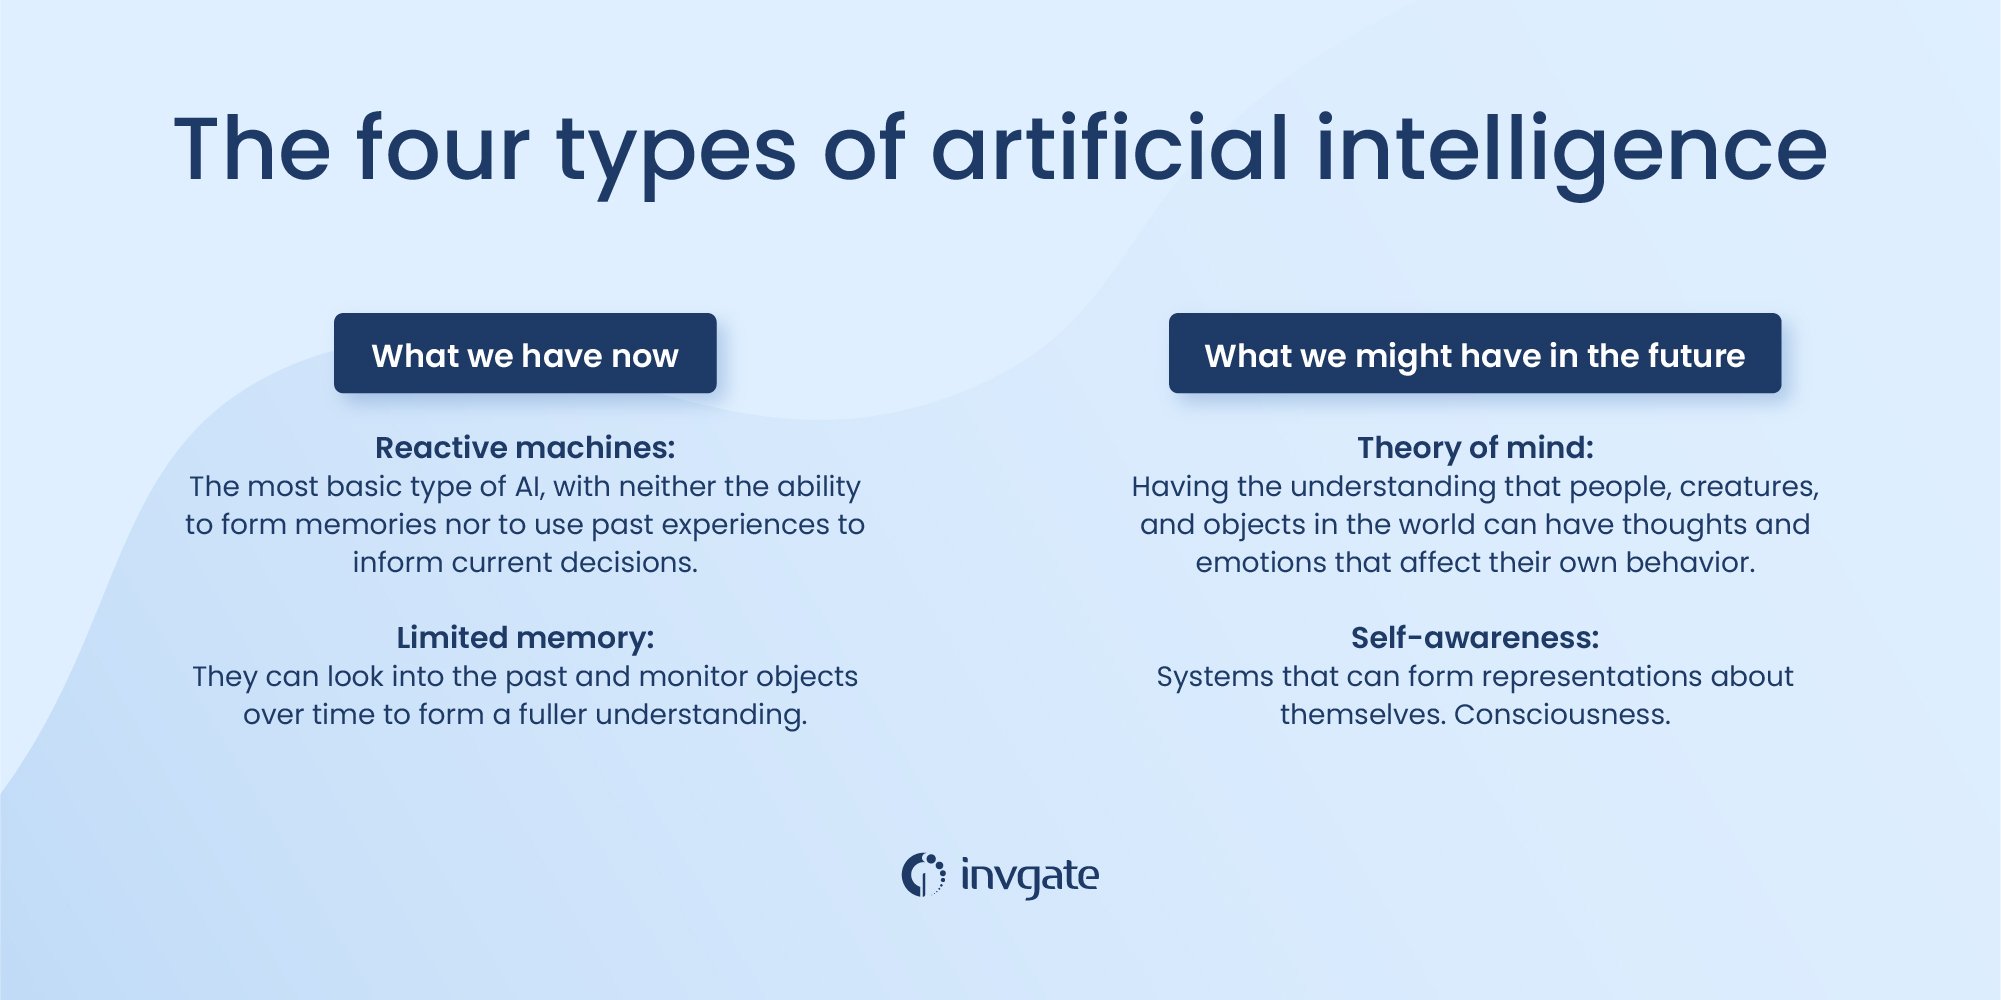 The four types of artificial intelligence